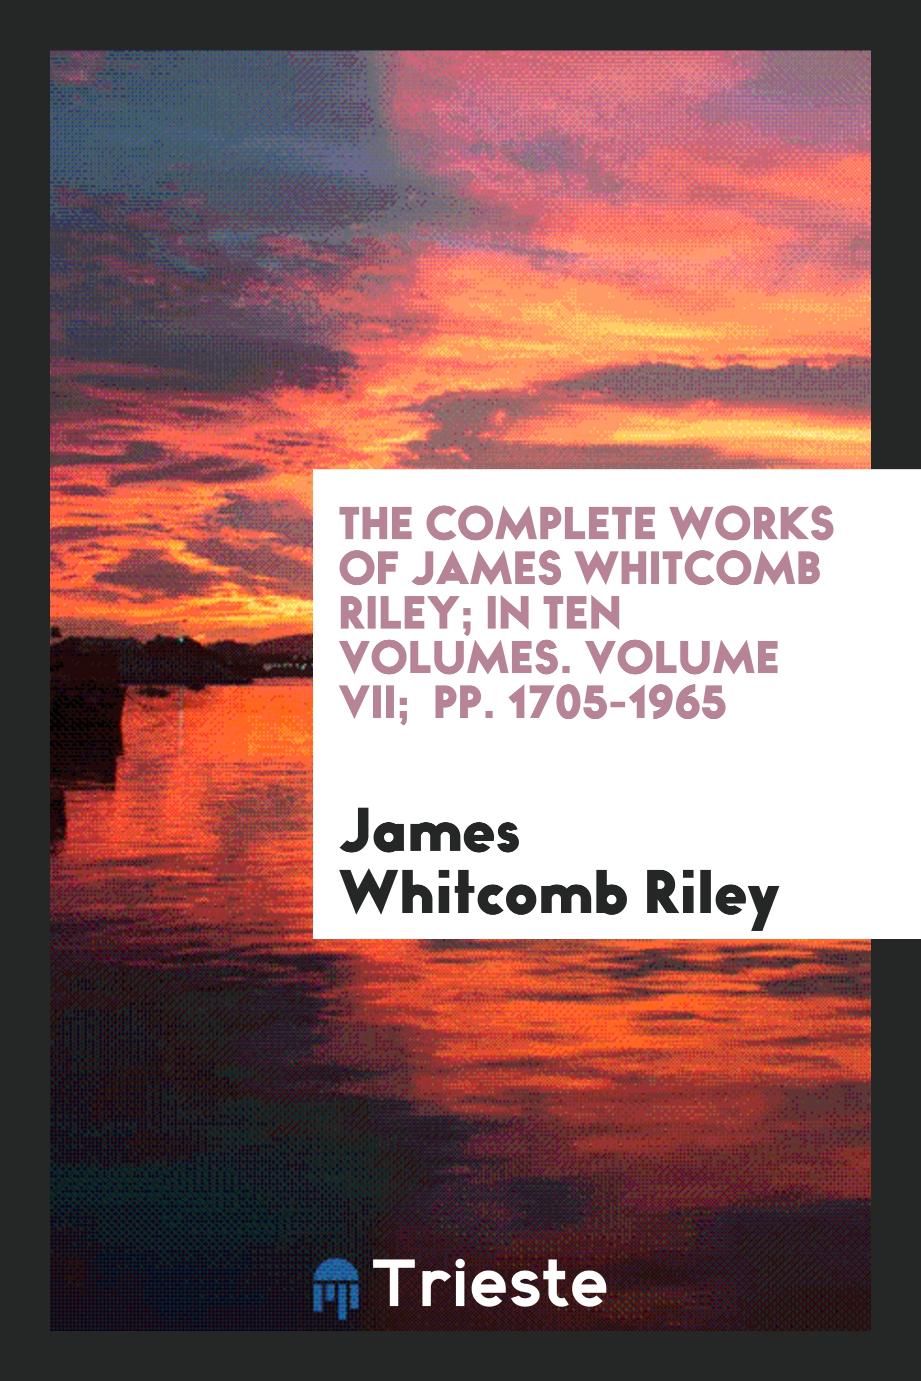 The complete works of James Whitcomb Riley; in ten volumes. Volume VII; pp. 1705-1965